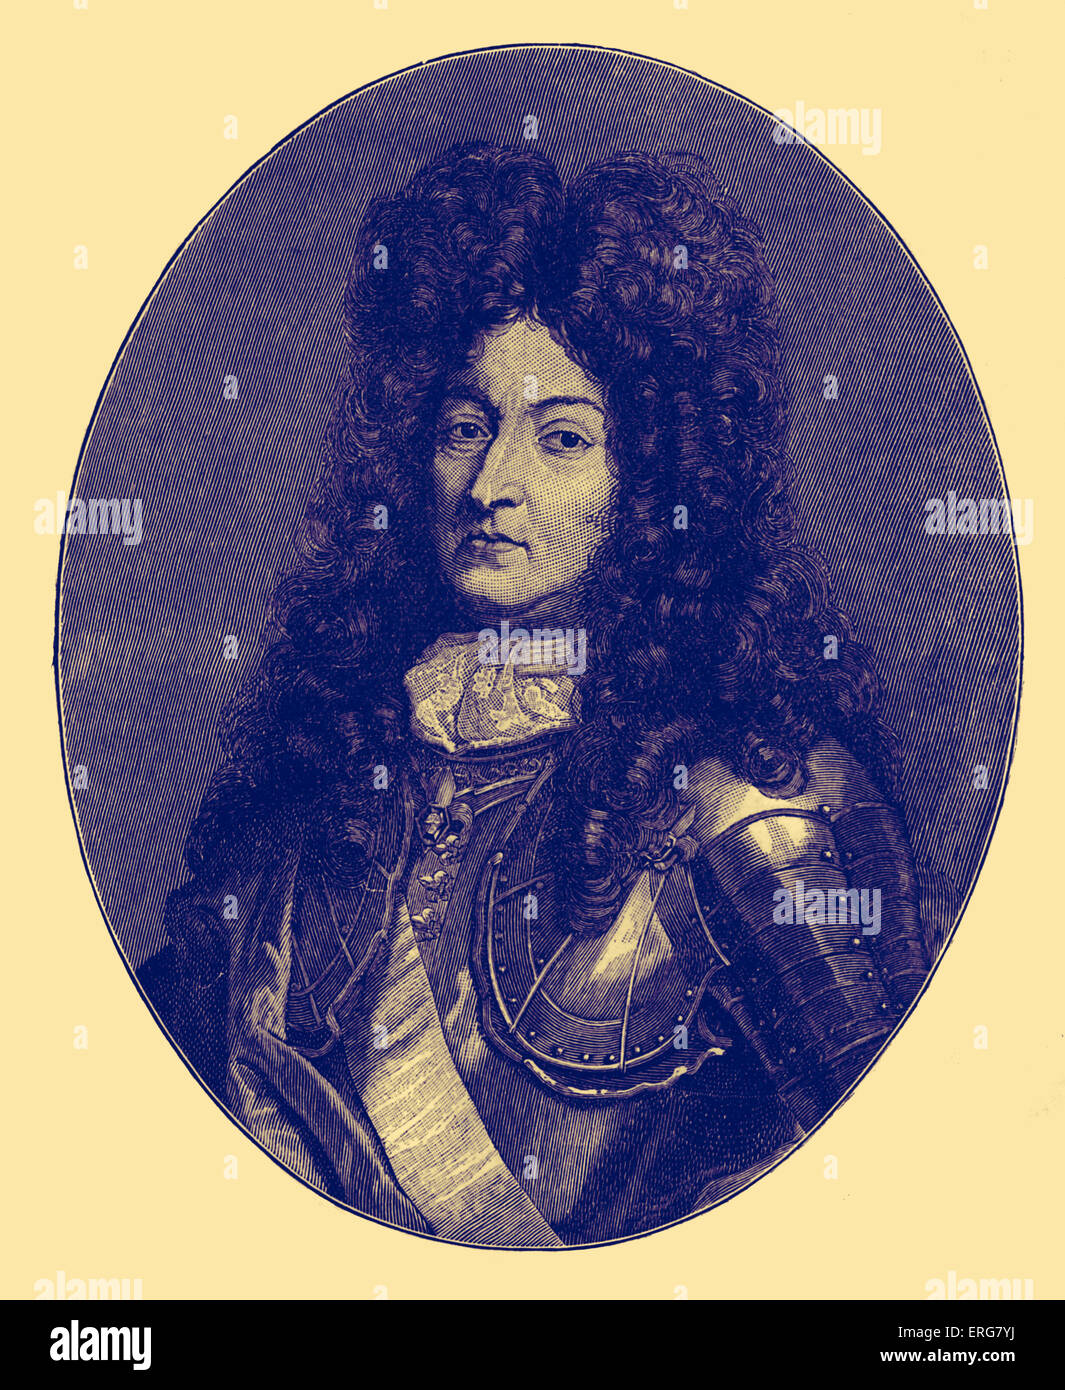 Louis XIV of France, portrait. Known as the Sun King (le Roi Soleil), reigned from 1643 to his death in 1715.  B. September Stock Photo